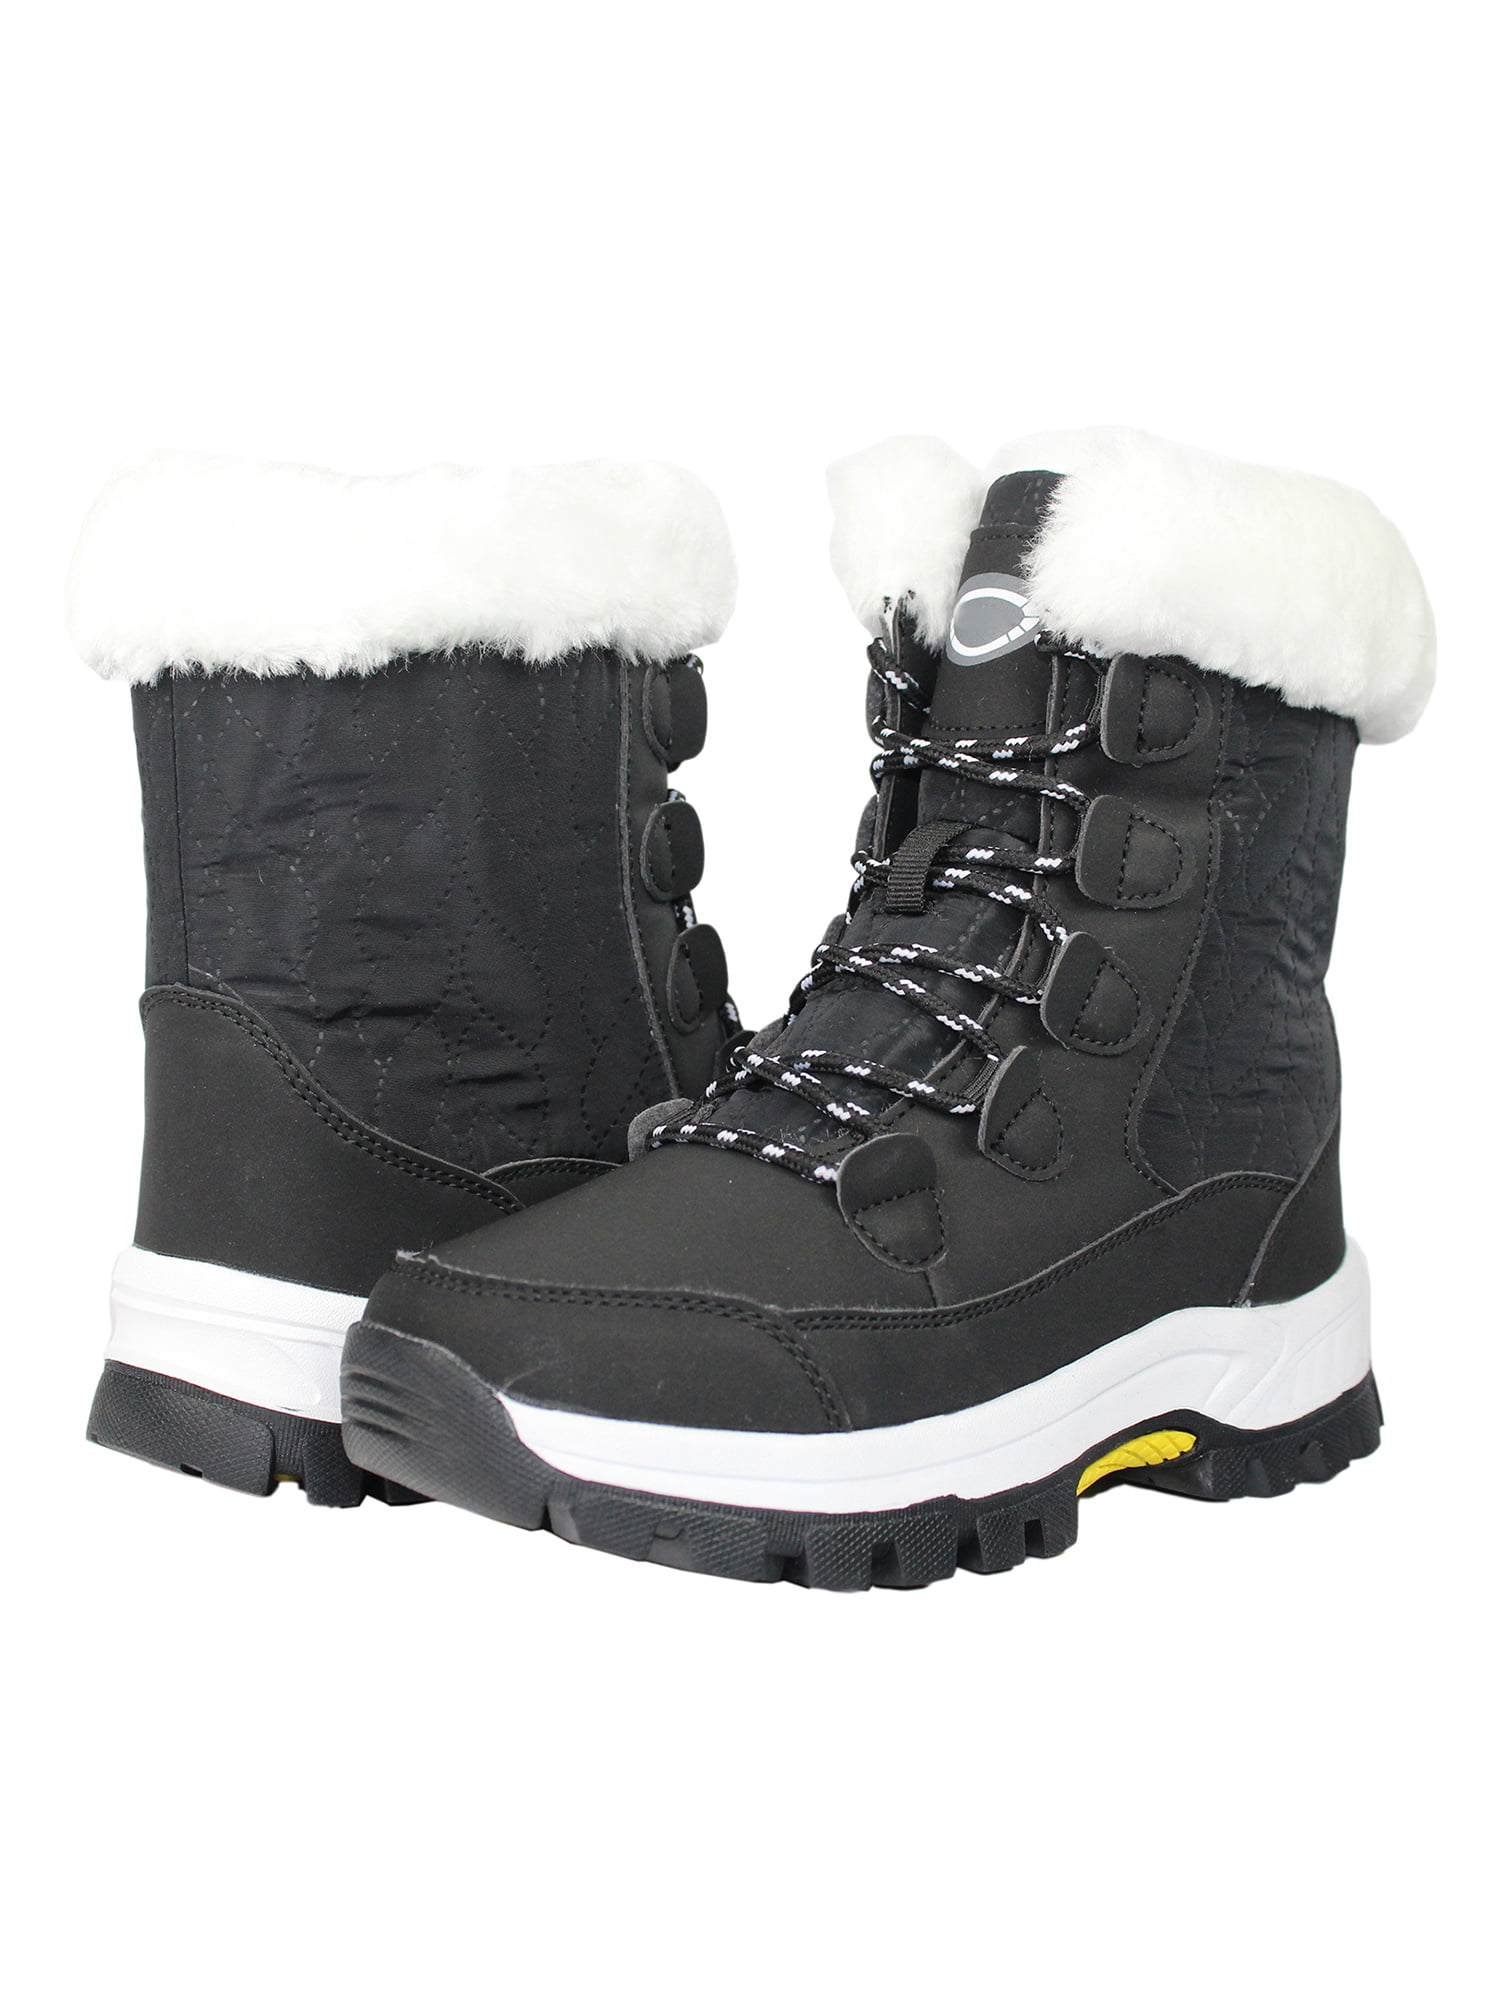 Woman Snow Boots Non-Slip Sole Lace Up Fashion Plush Lining Warm Winter Waterproof Outdoors Female Footware